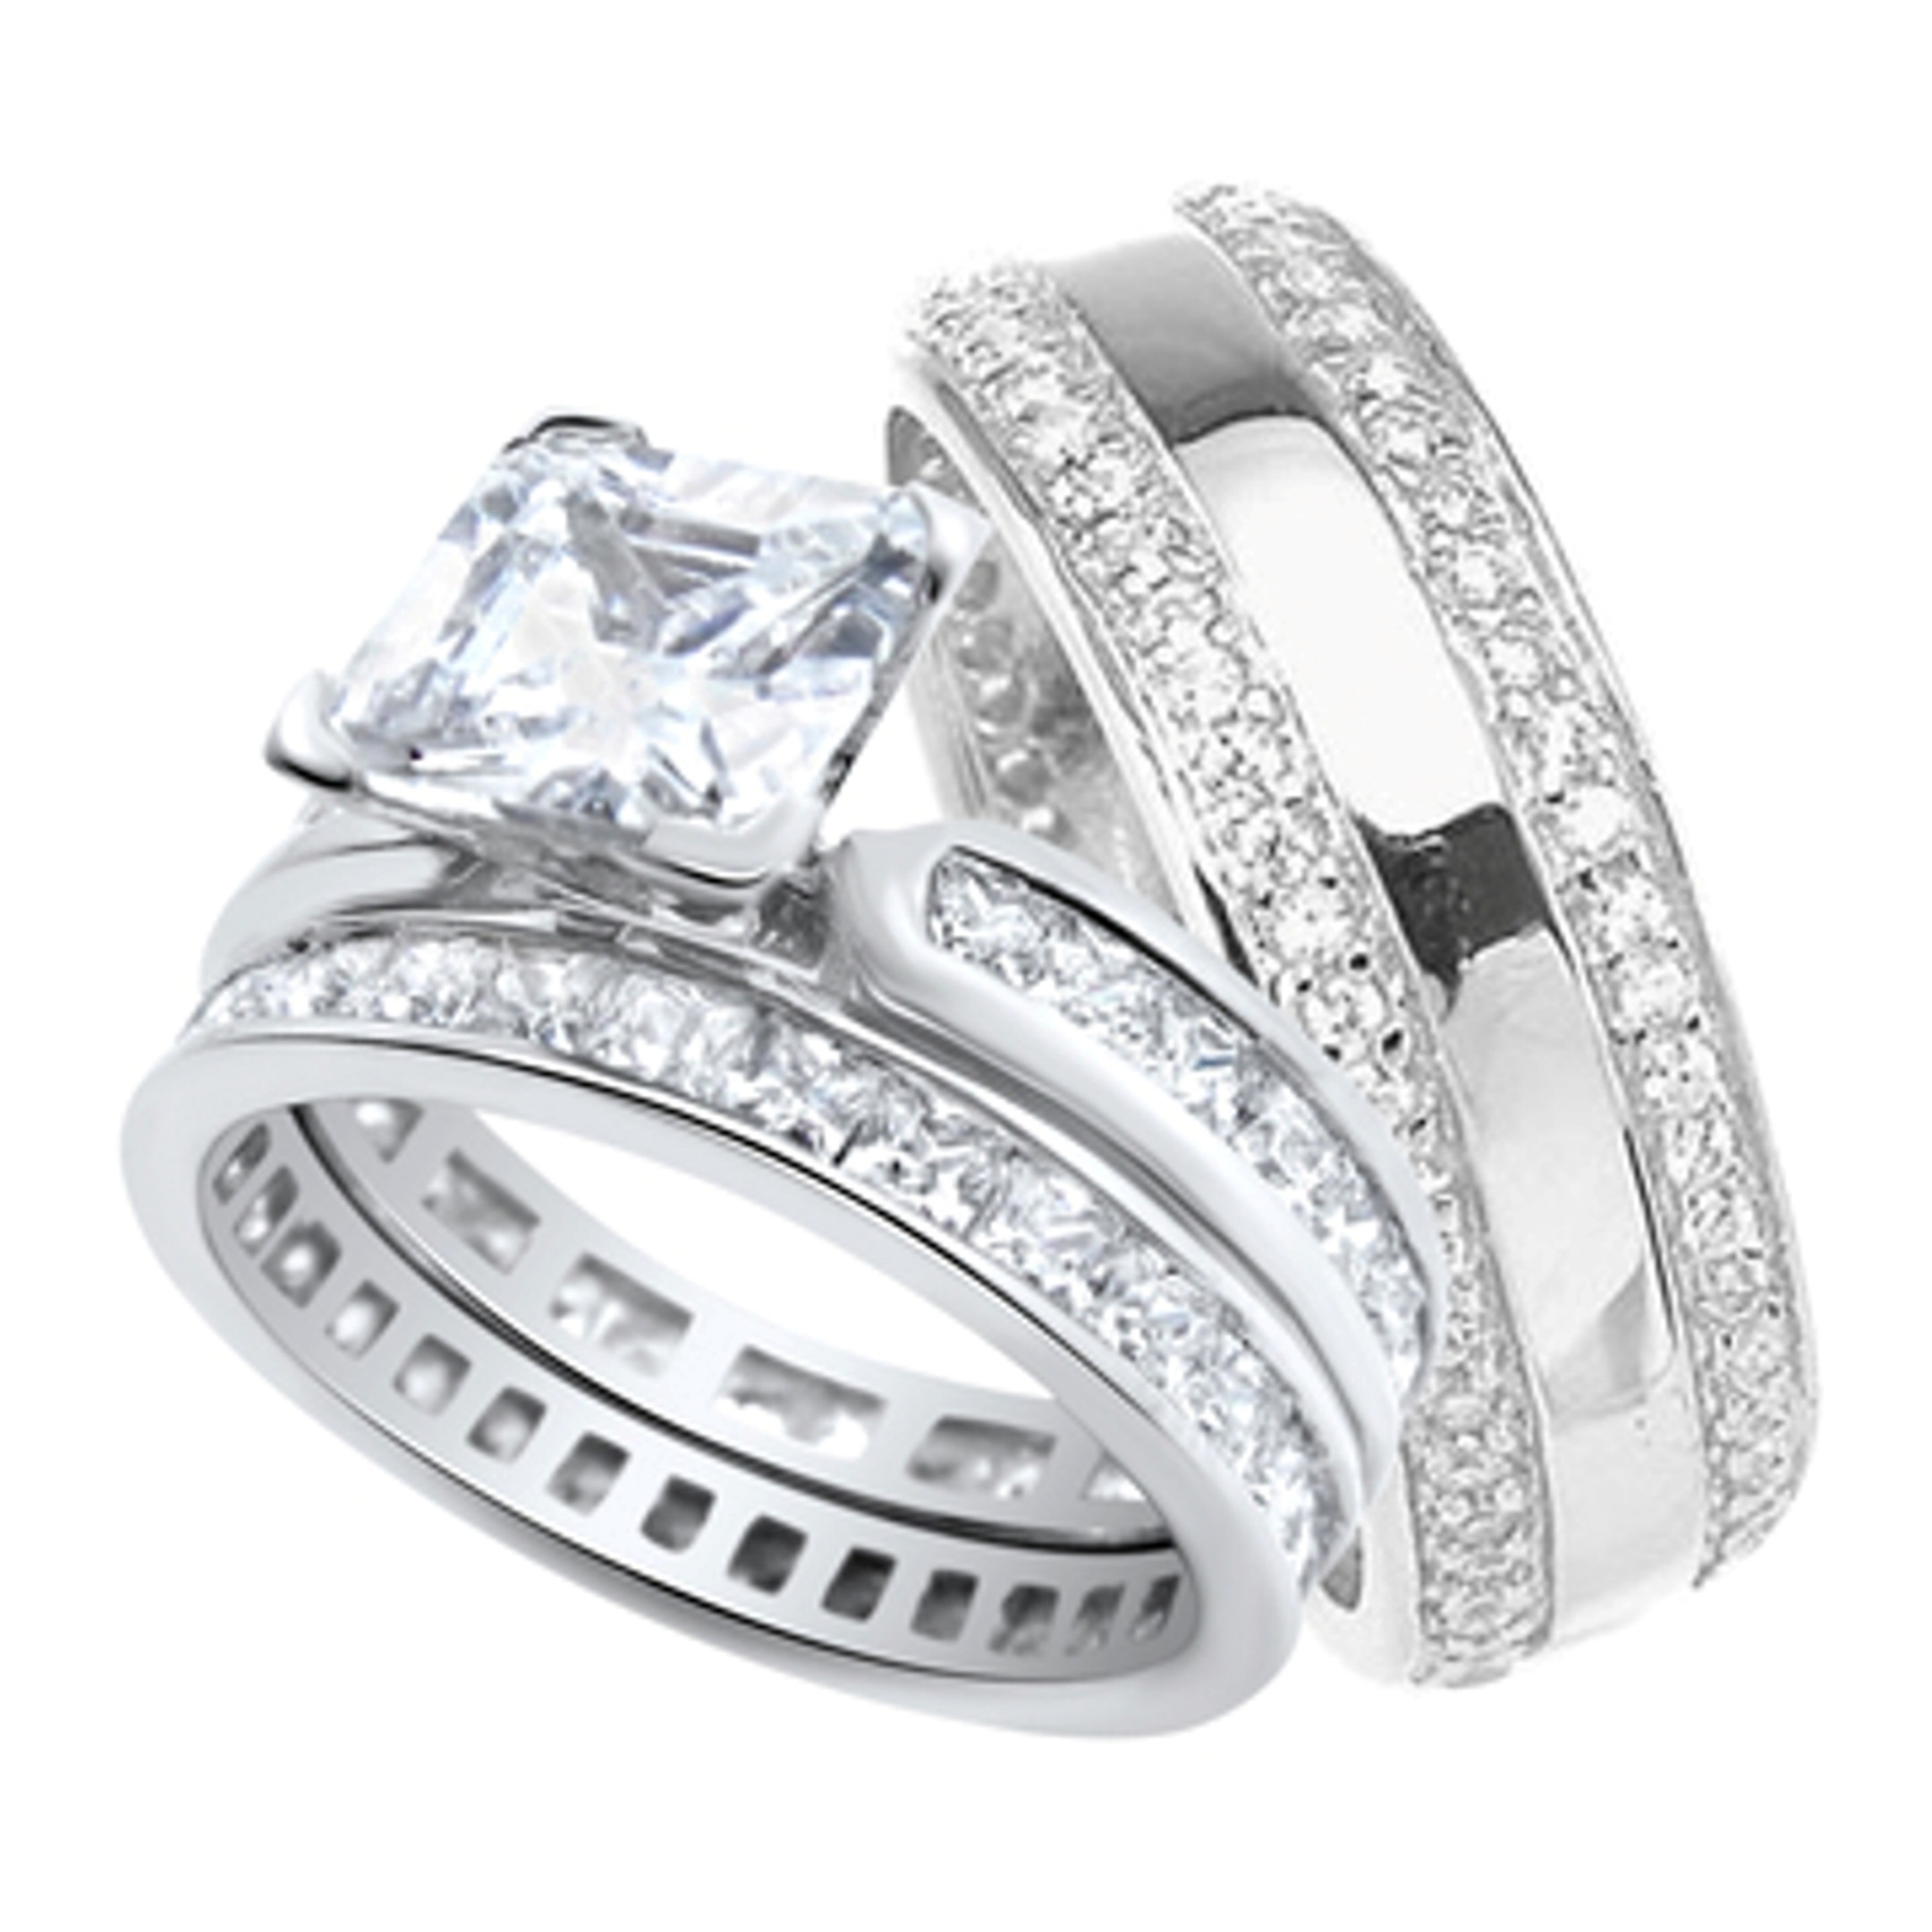 Wedding Ring Sets For Him And Her Walmart
 His and Hers Wedding Ring Set Matching Sterling Silver